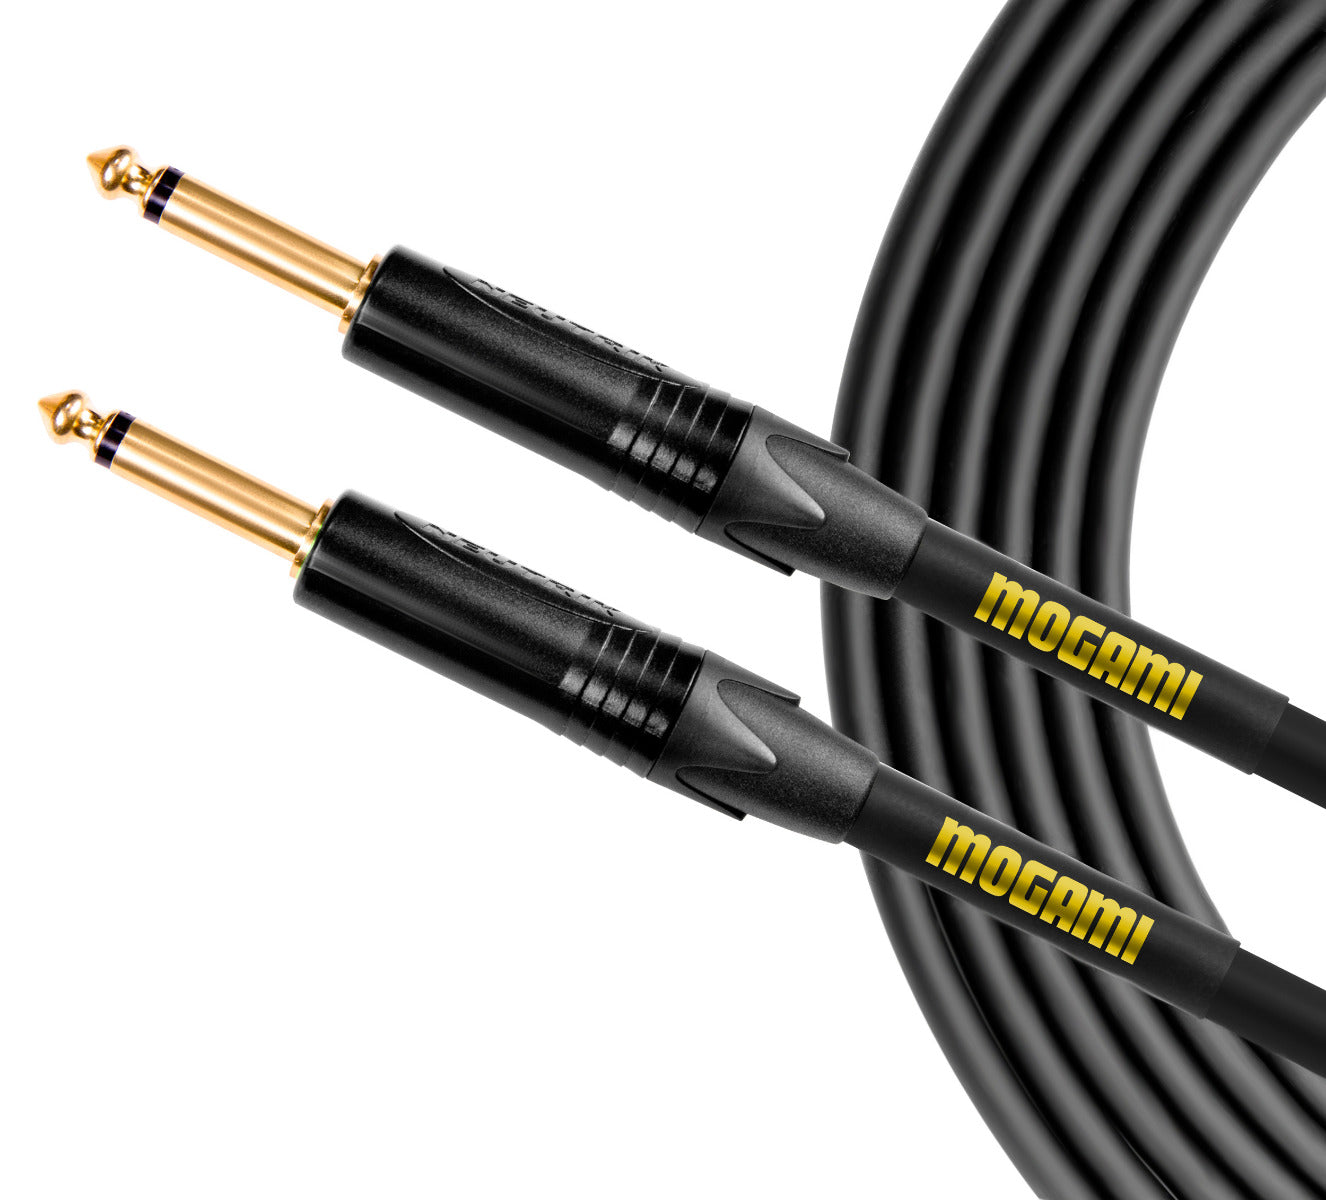 Mogami Gold Instrument Cable - 6'